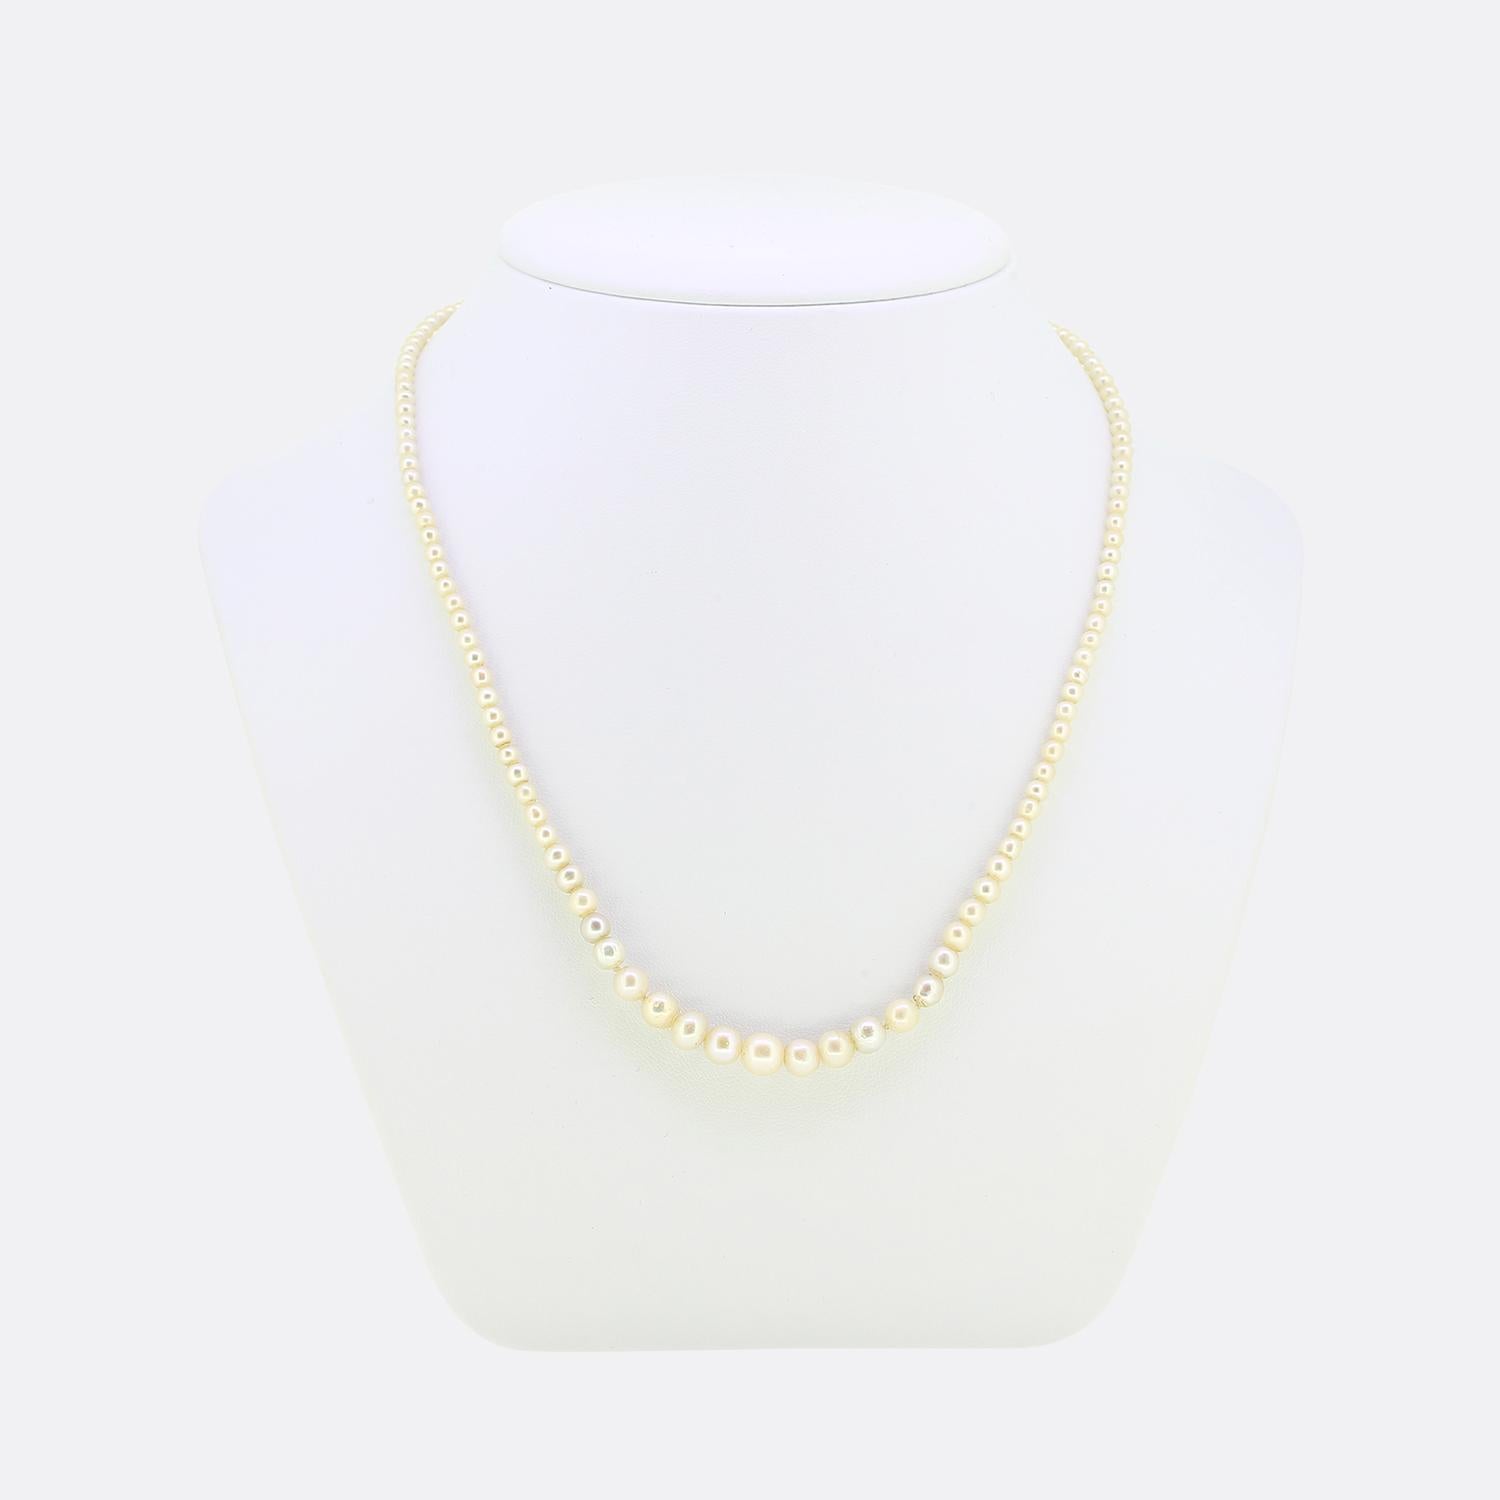 Here we have a delightful natural pearl necklace crafted at a time when the Art Deco style was at the height of design. This piece consists of single row of straight strung rounded, oval and baroque shaped saltwater pearls; all of which graduate in